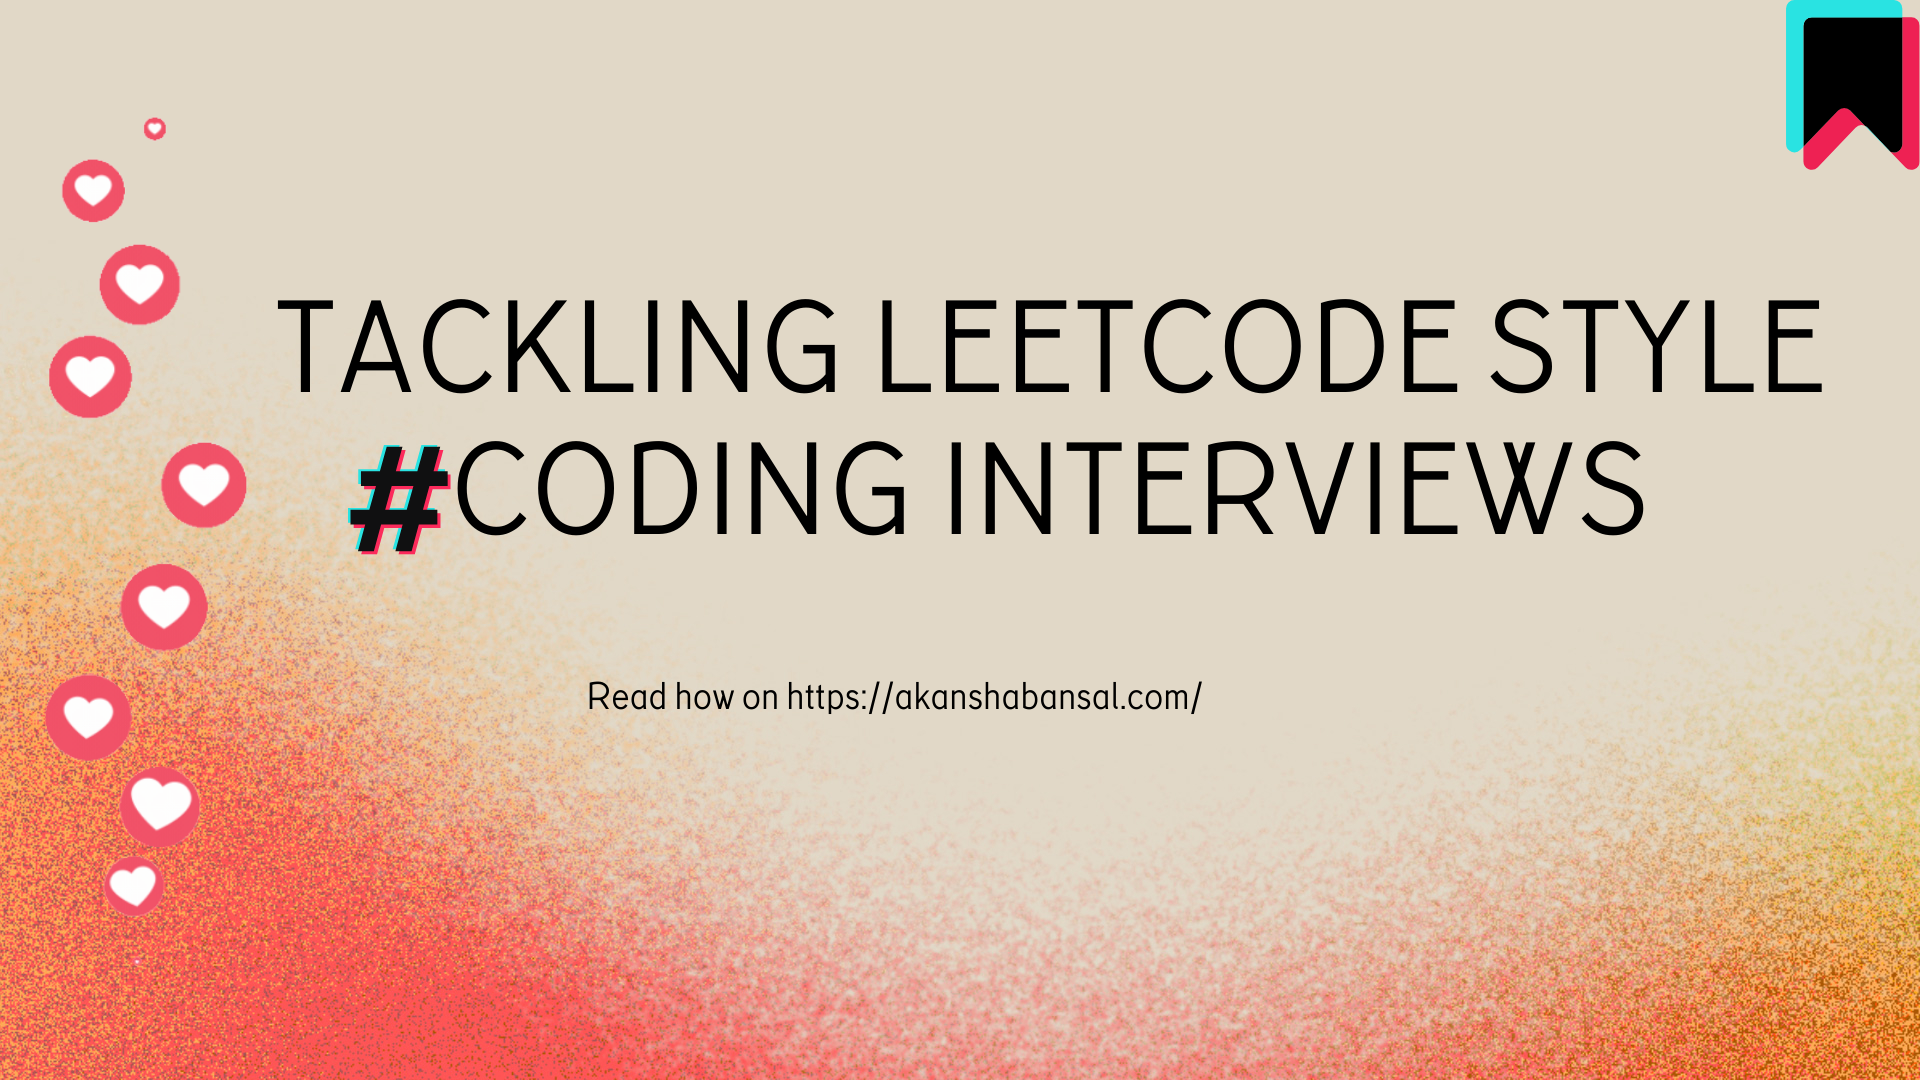 Crack the Coding Interview Code: Tips to Dominate LeetCode Challenges